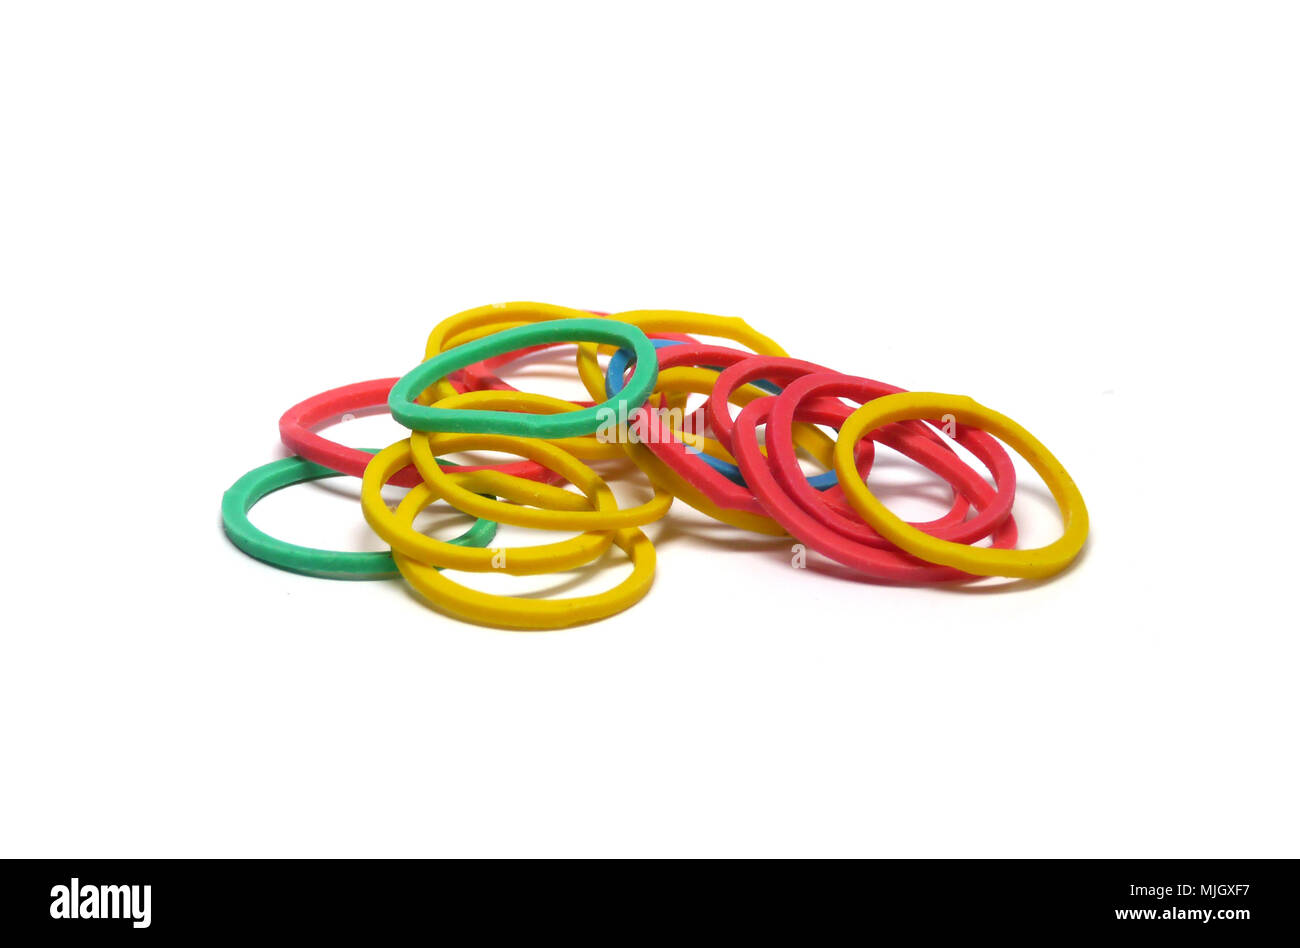 Five tie an elastic band Stock Photo - Alamy